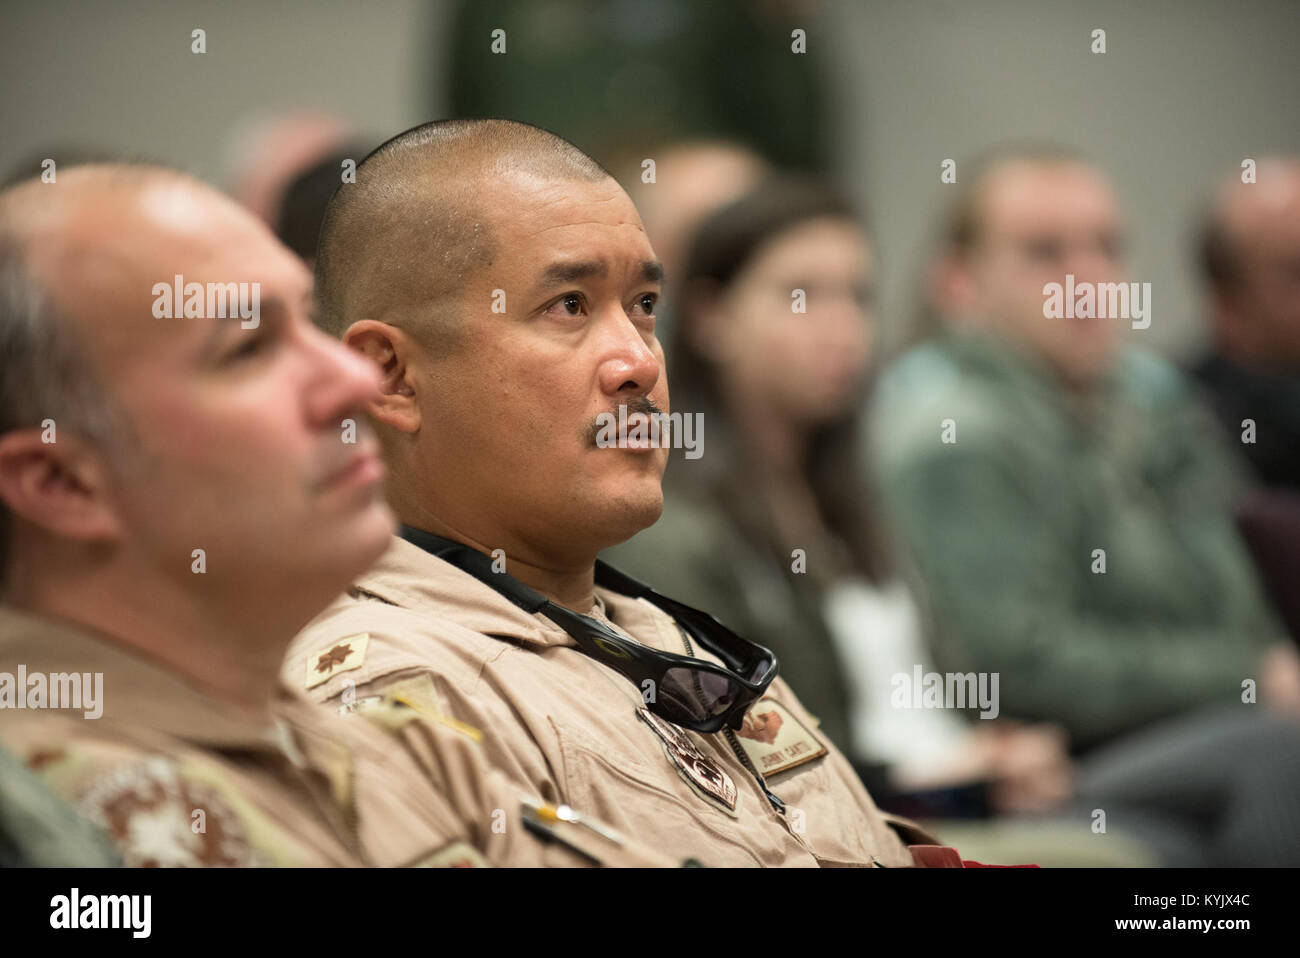 Maj. Johnny Cantu, a C-130 pilot in the 123rd Airlift Wing, attends a briefing at the Kentucky Air National Guard Base in Louisville, Ky., April 24, 2015, prior to his deployment to an undisclosed air base in the Persian Gulf region. Cantu and more than 40 other Kentucky Air Guardsmen comprise the third rotation of 123rd Airmen to deploy to the base since February. They will be flying airlift missions throughout the U.S. Central Command Area of Responsibility in support of Operation Freedom's Sentinel, which provides military training and counterterrorism capabilities in Afghanistan. (U.S. Air Stock Photo